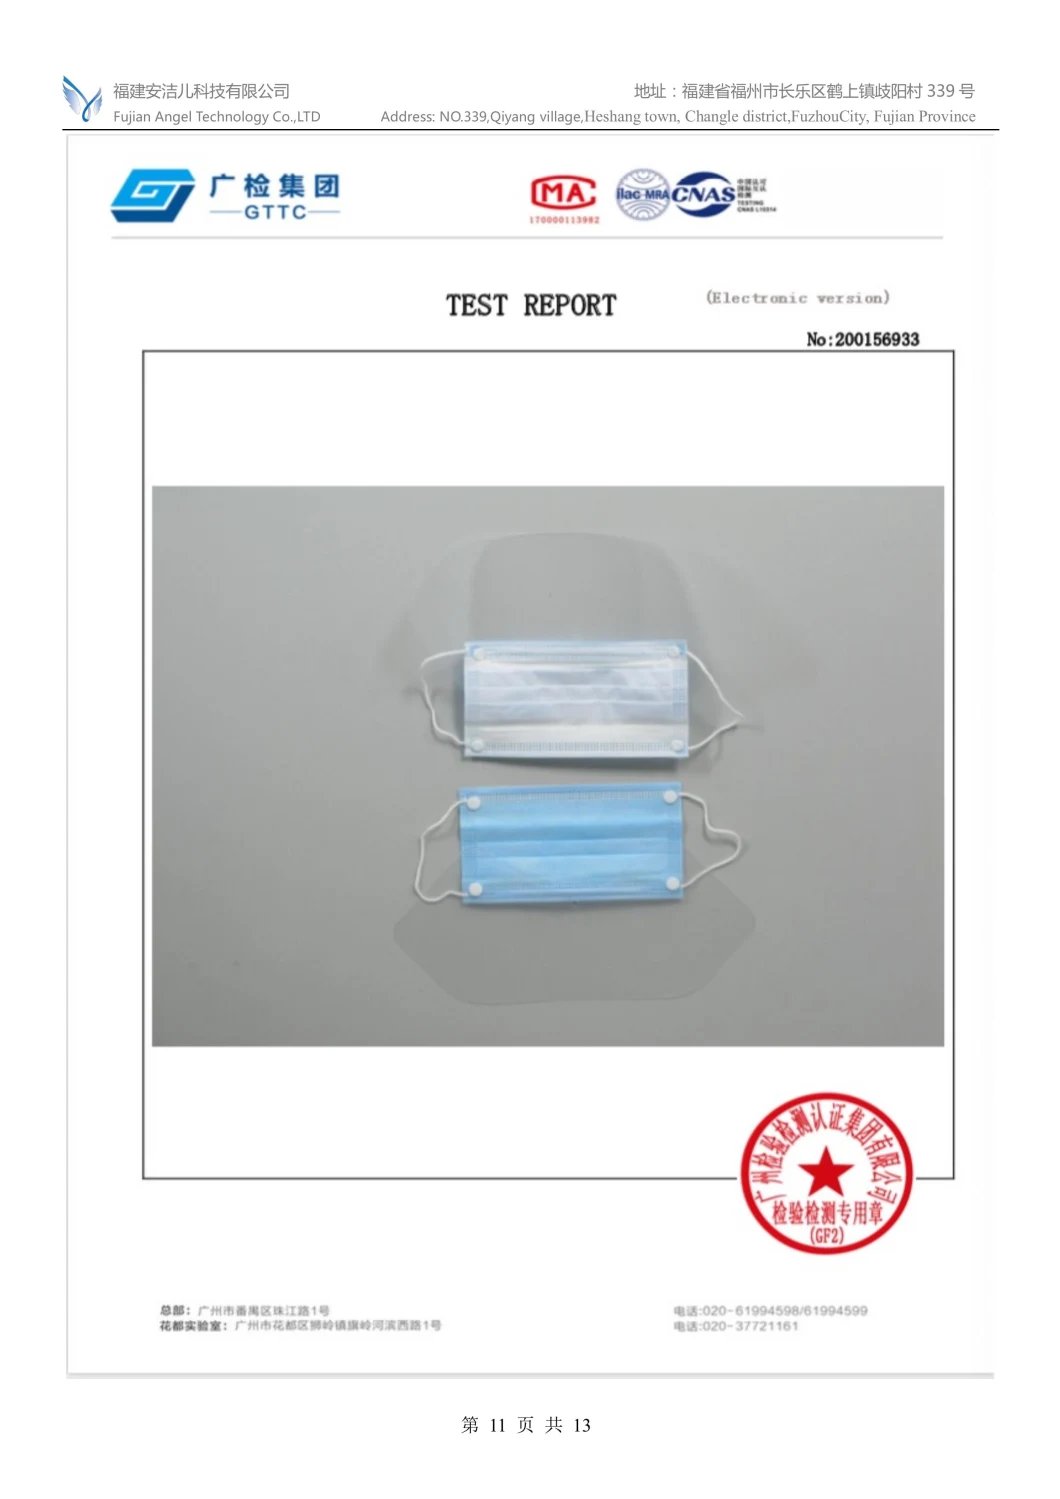 Disposable 3ply Blue Safety Face Mask with Clear Plastic Eye Shield